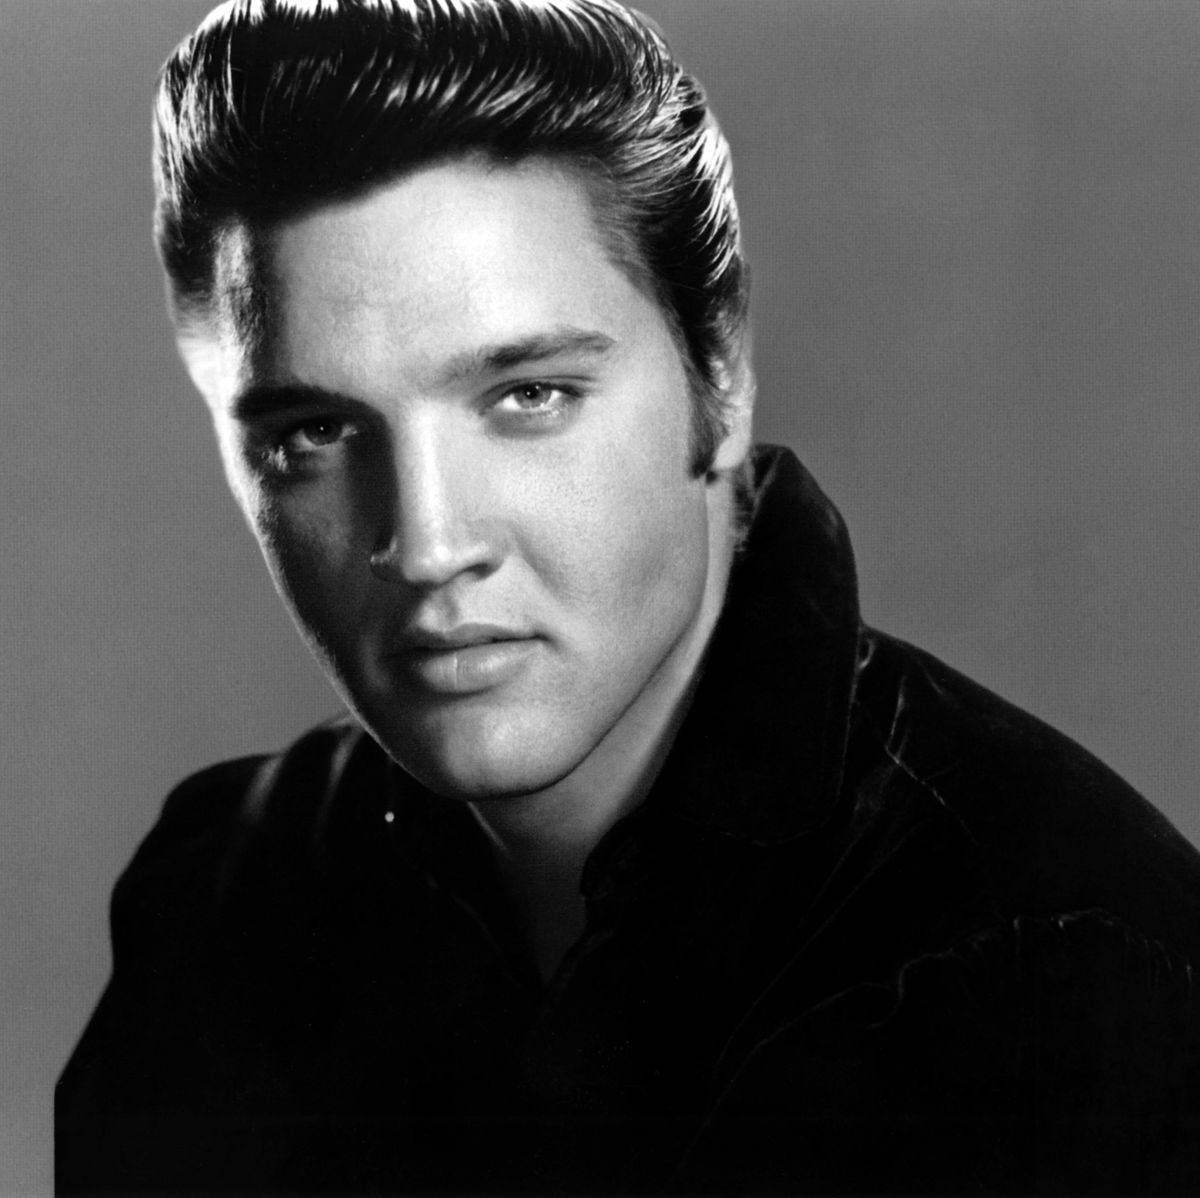 how much did elvis weigh when he died